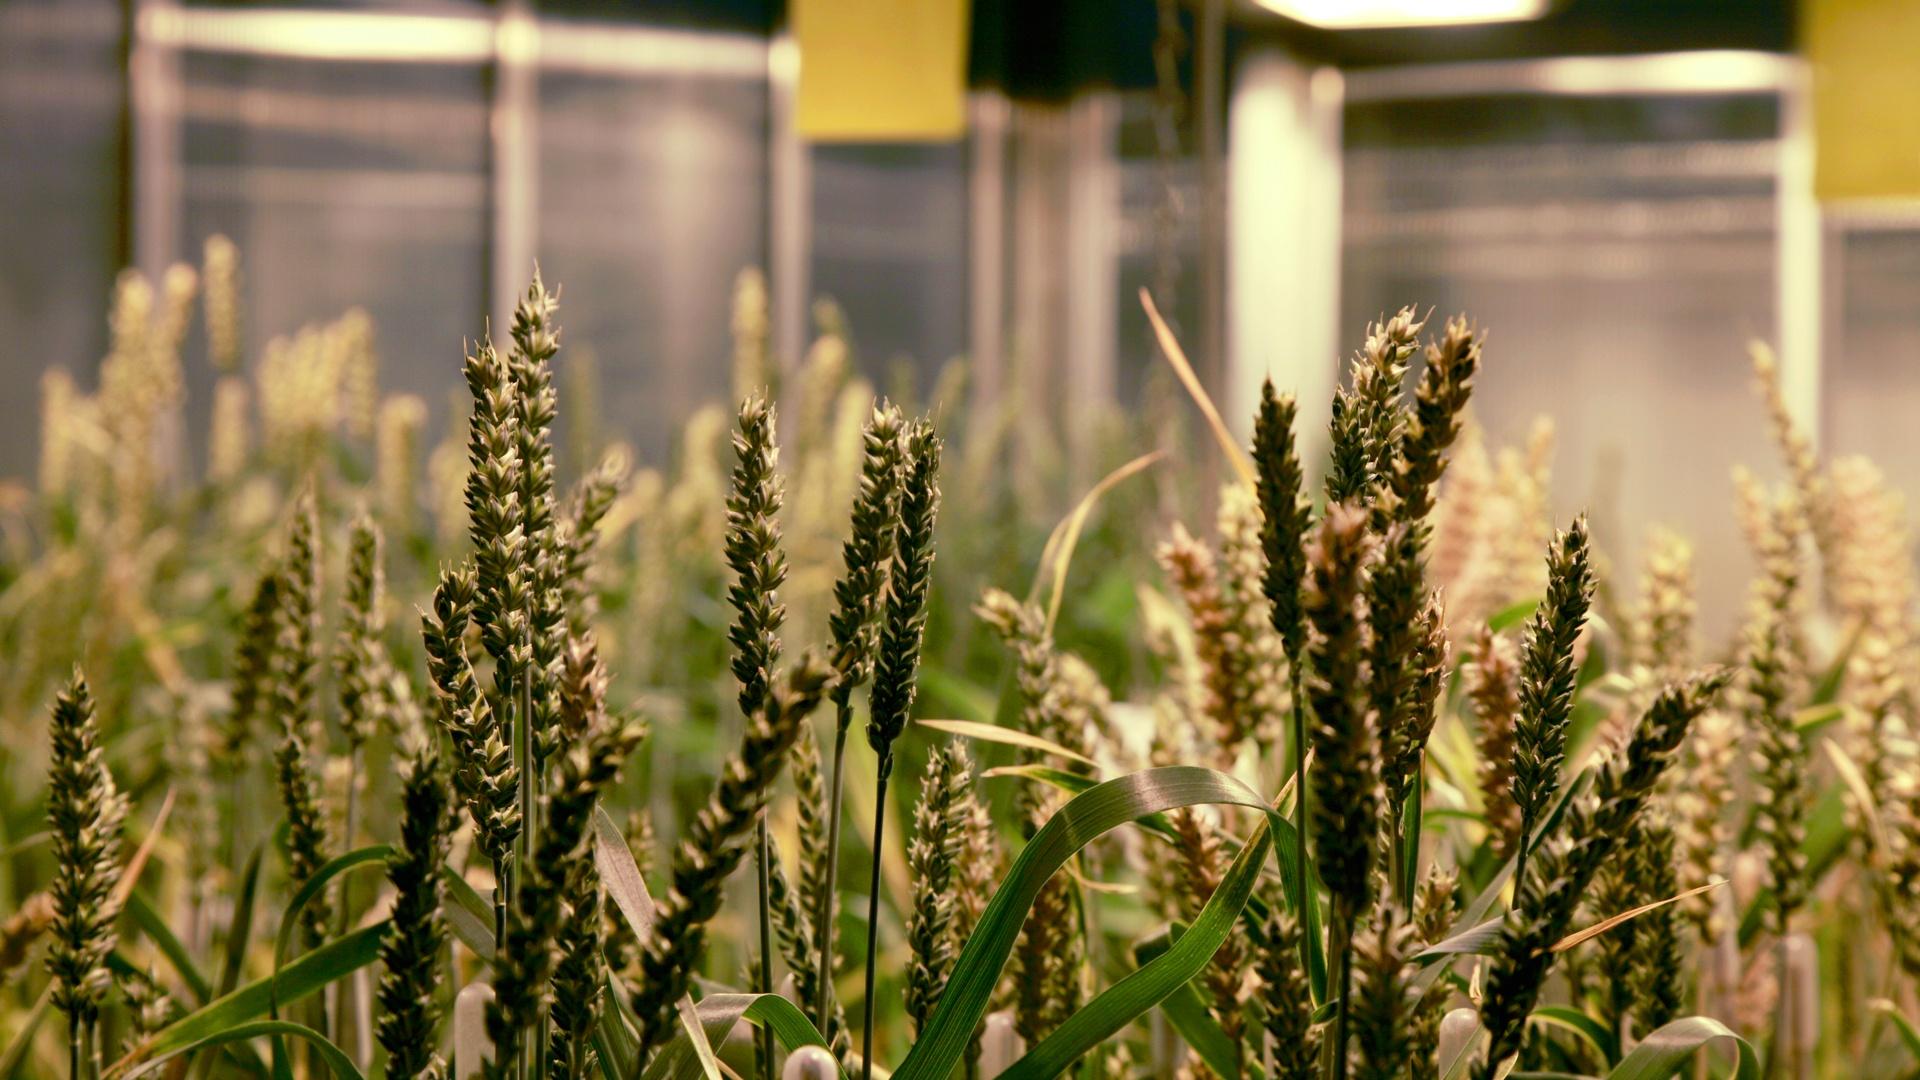 Wheat being grown at Rothamsted Research, as part of the 20:20 initiative.